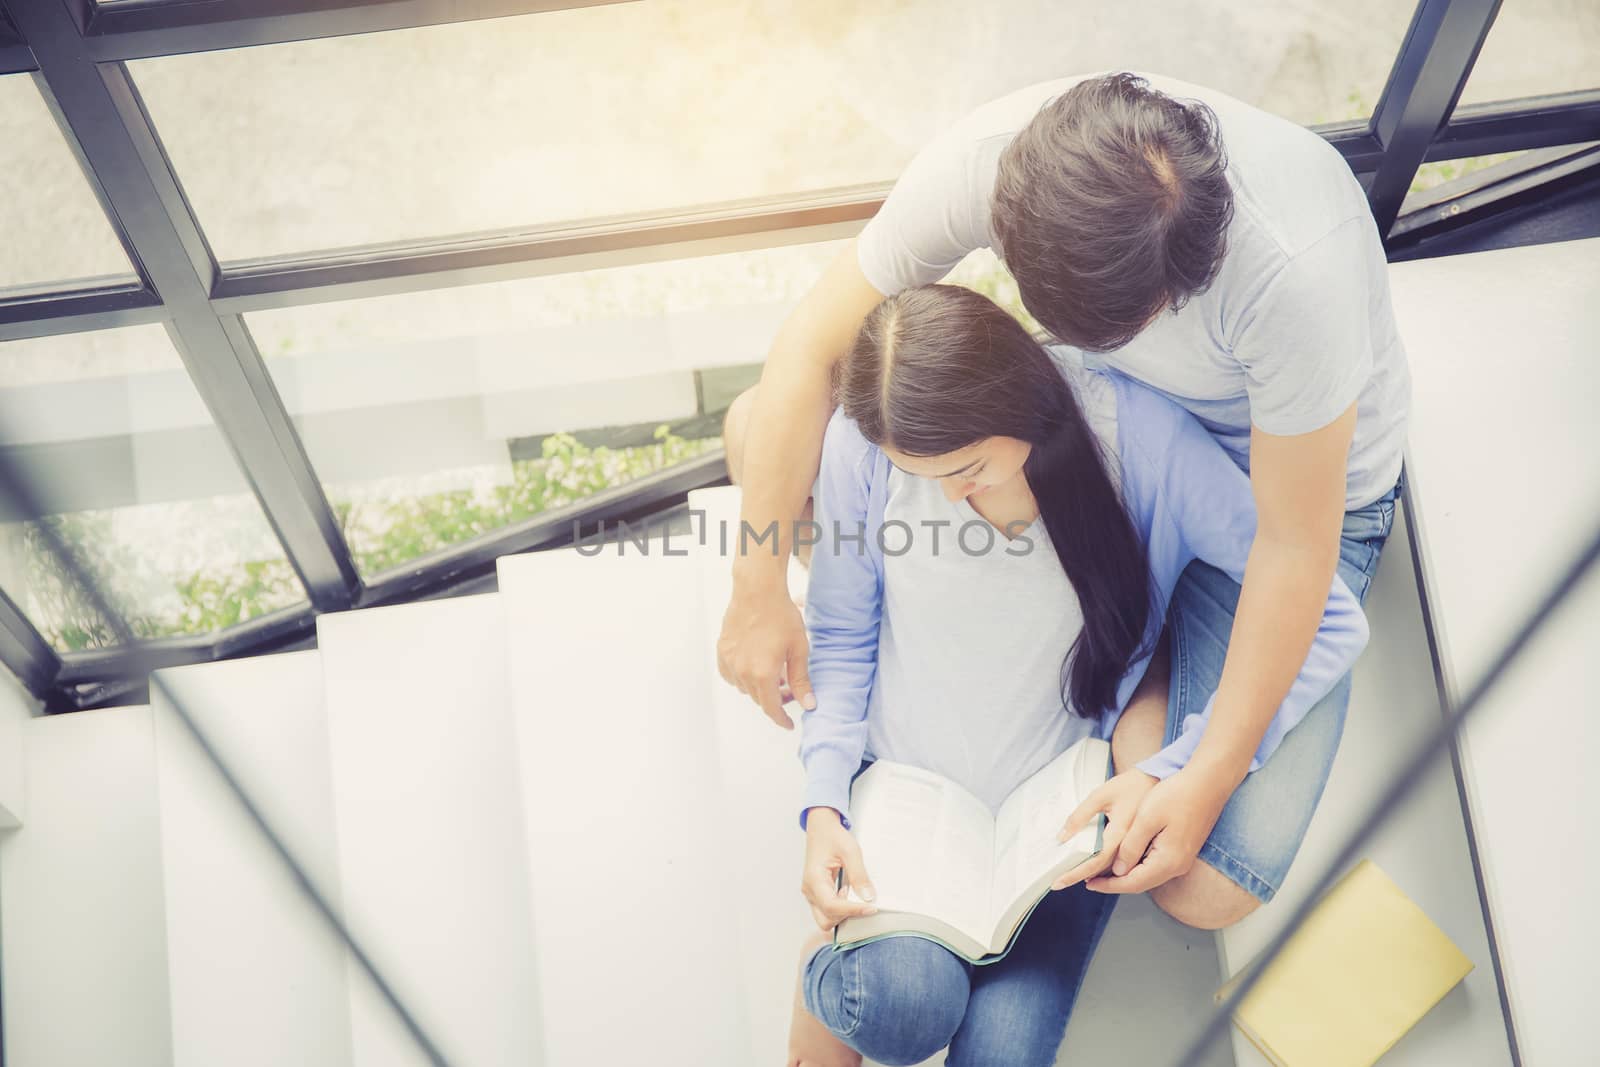 Couple asian handsome man and beautiful woman reading book and s by nnudoo